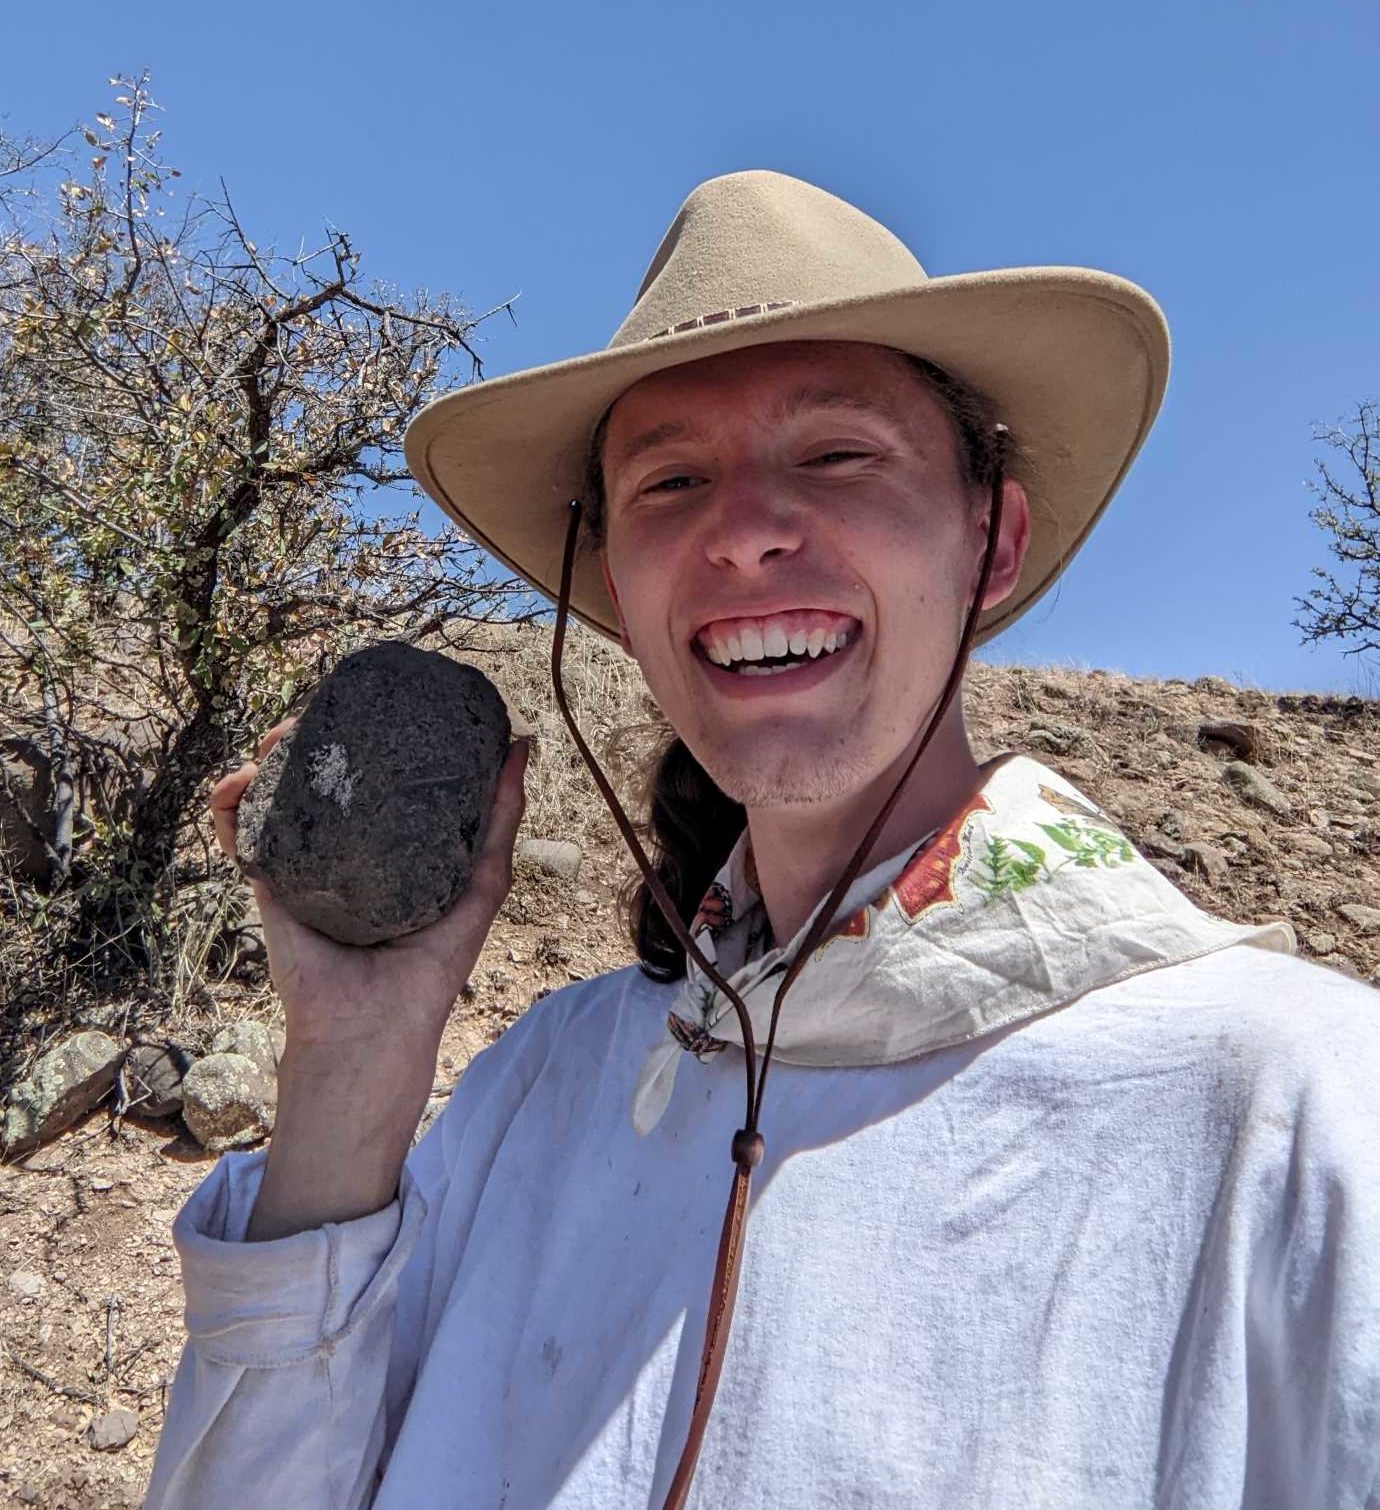 My elation upon finding the 2.55-pound obsidian nodule.